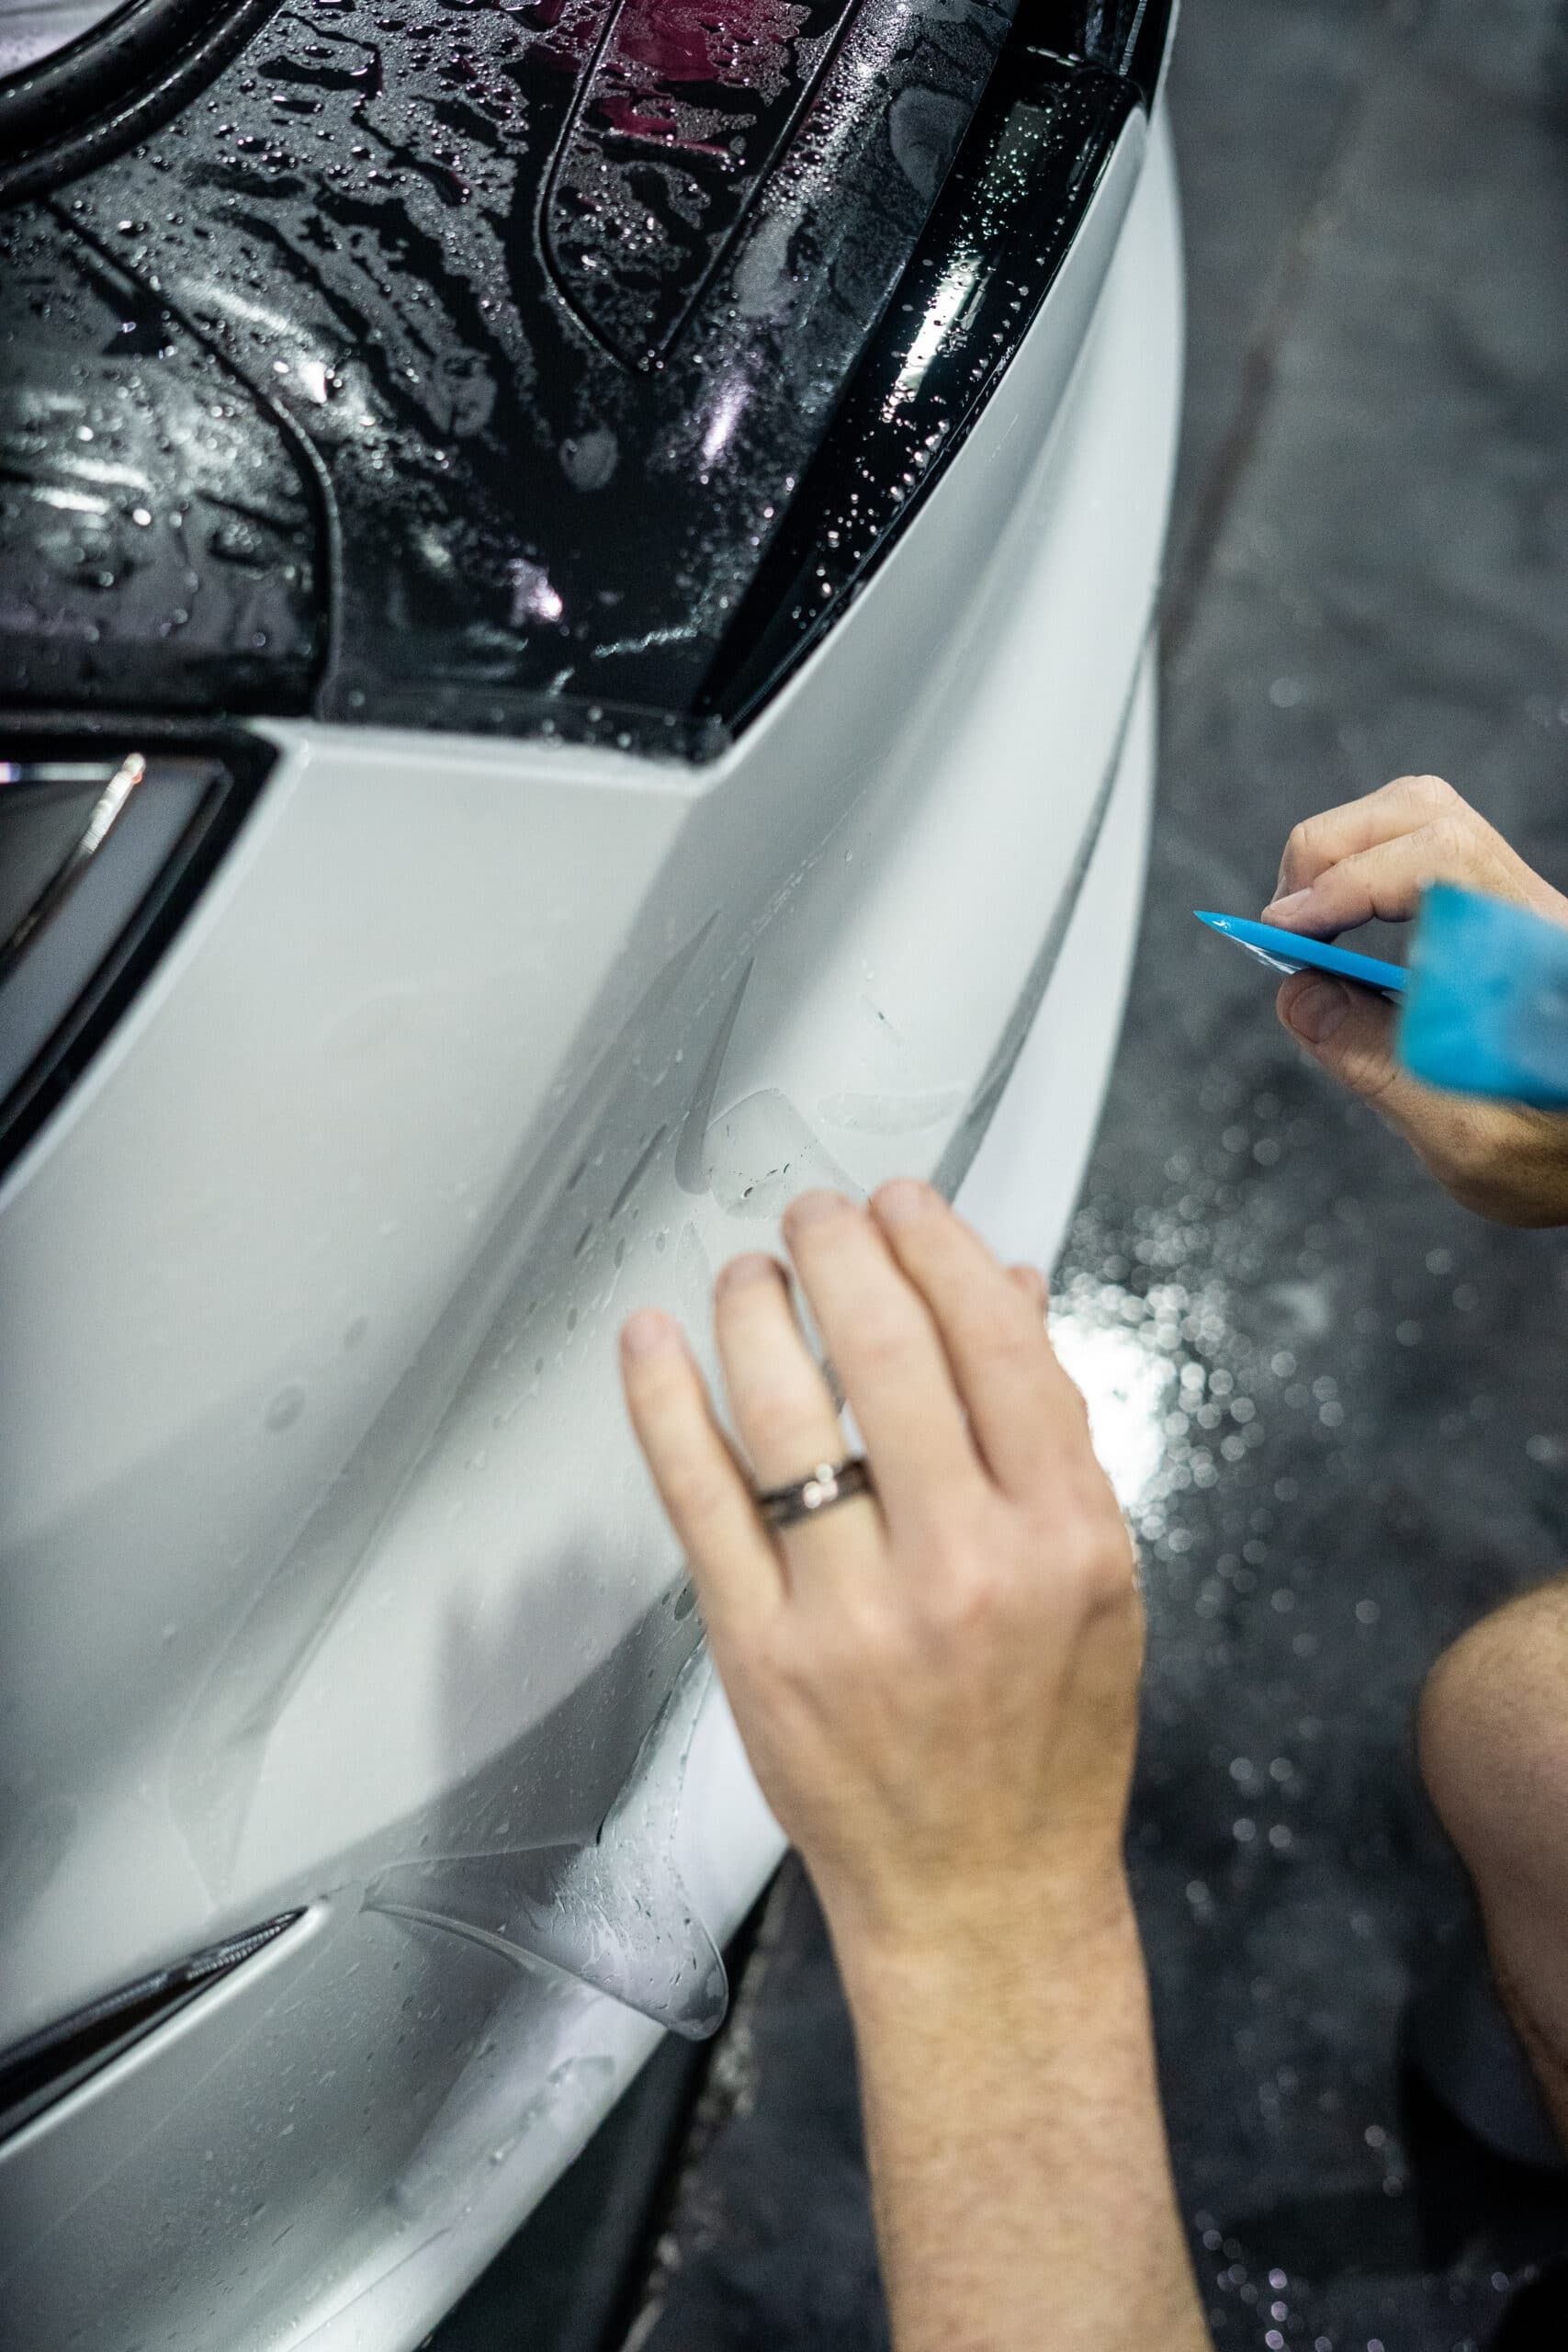 A person is applying a clear film to the front of a car.